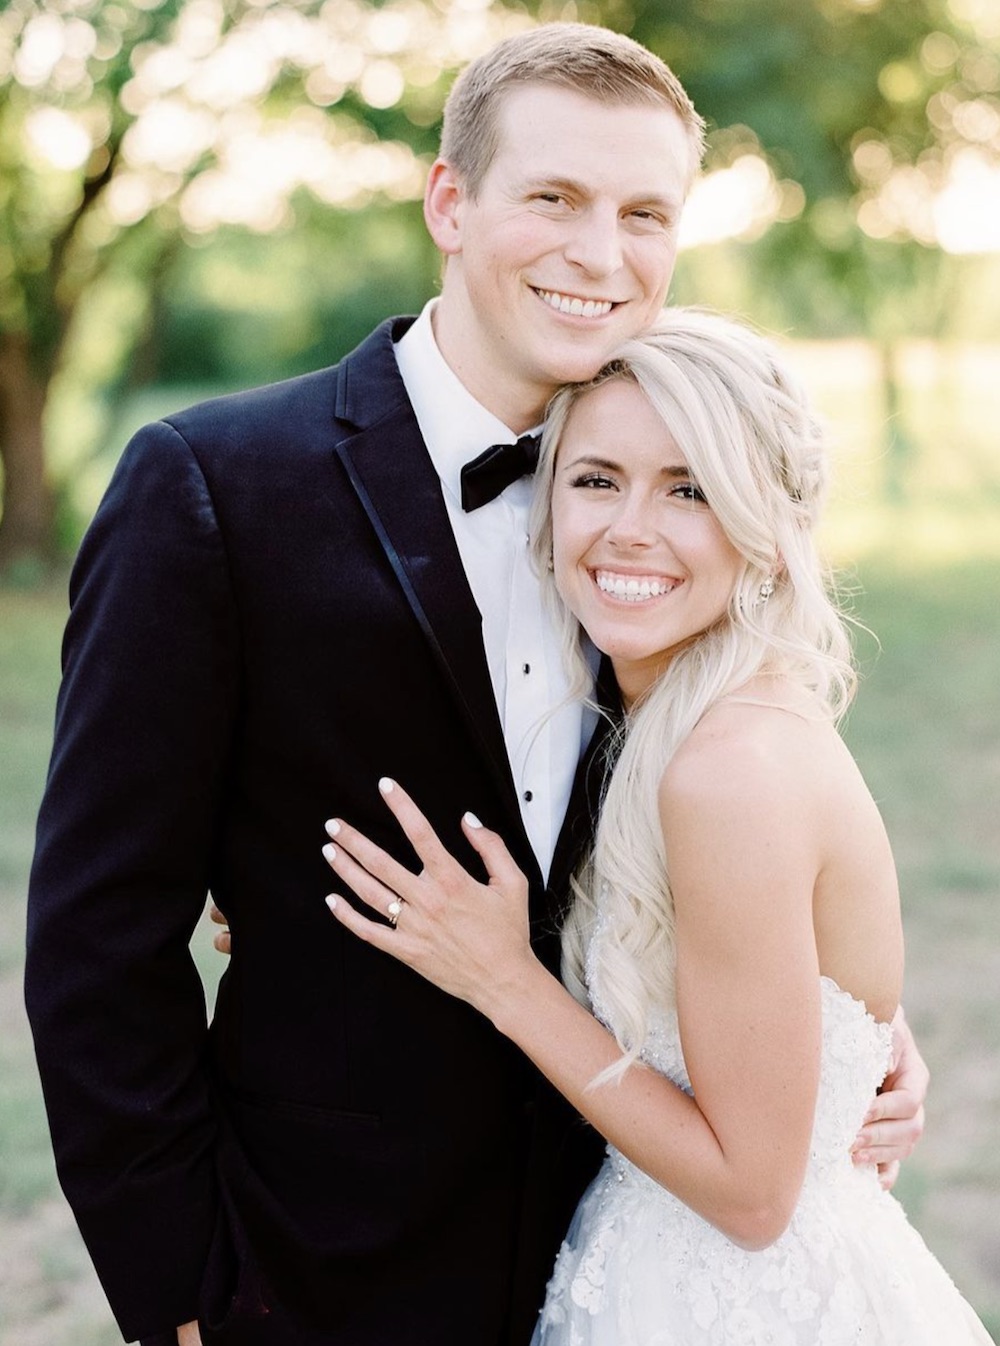 Mackenzie Reiter posing for a portrait photo with her husband on their wedding day